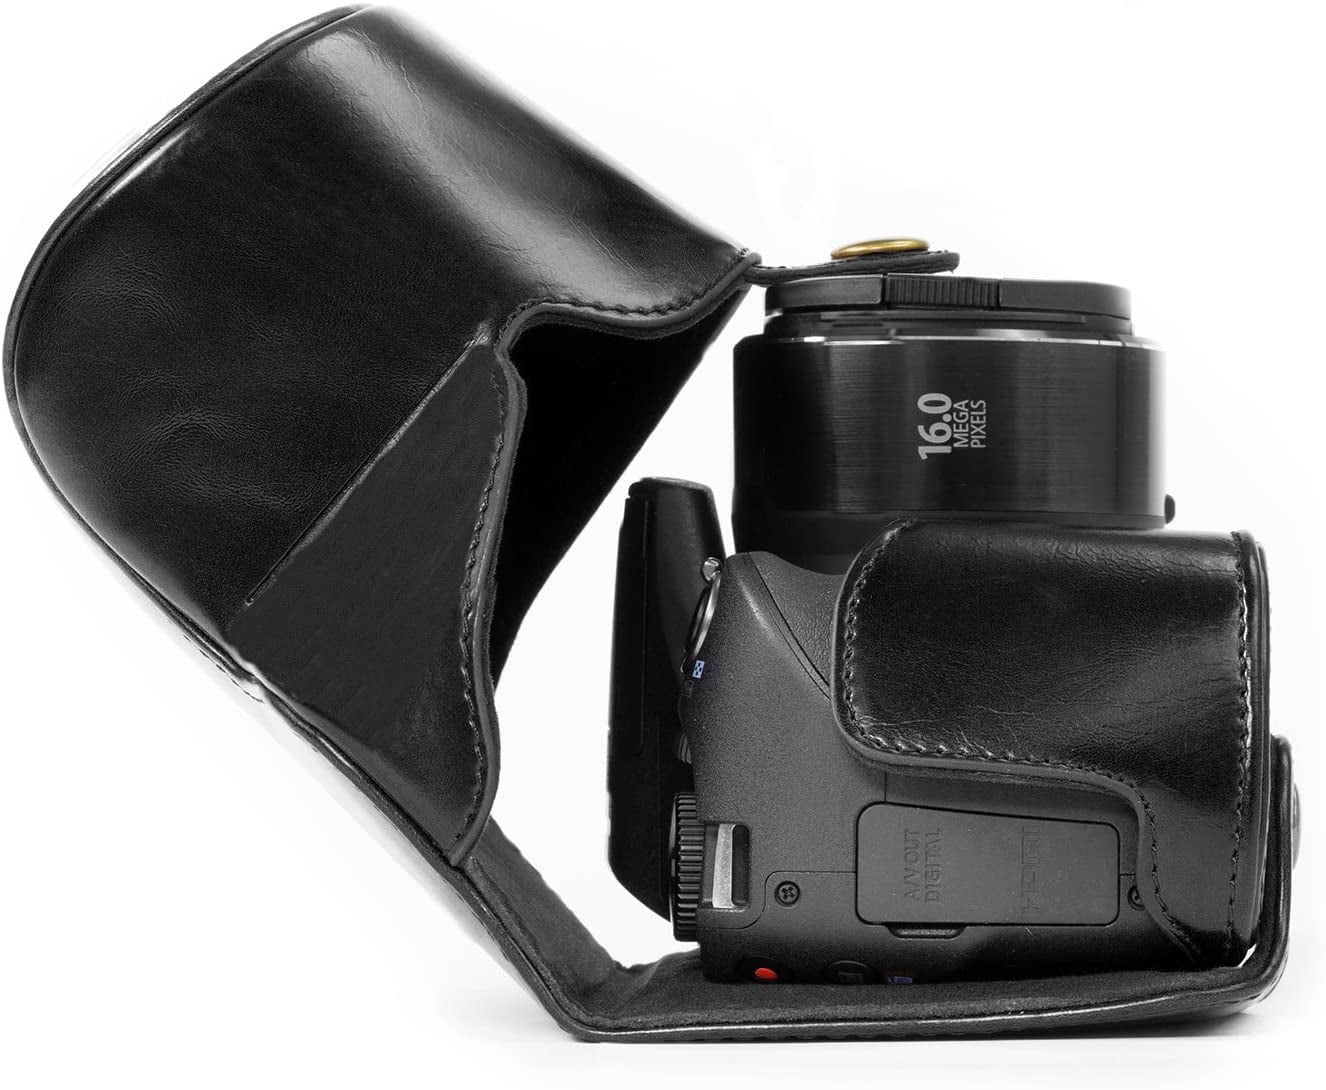 SX530 HS MegaGear Ever Ready Leather Camera Case Compatible with Canon PowerShot SX540 HS 